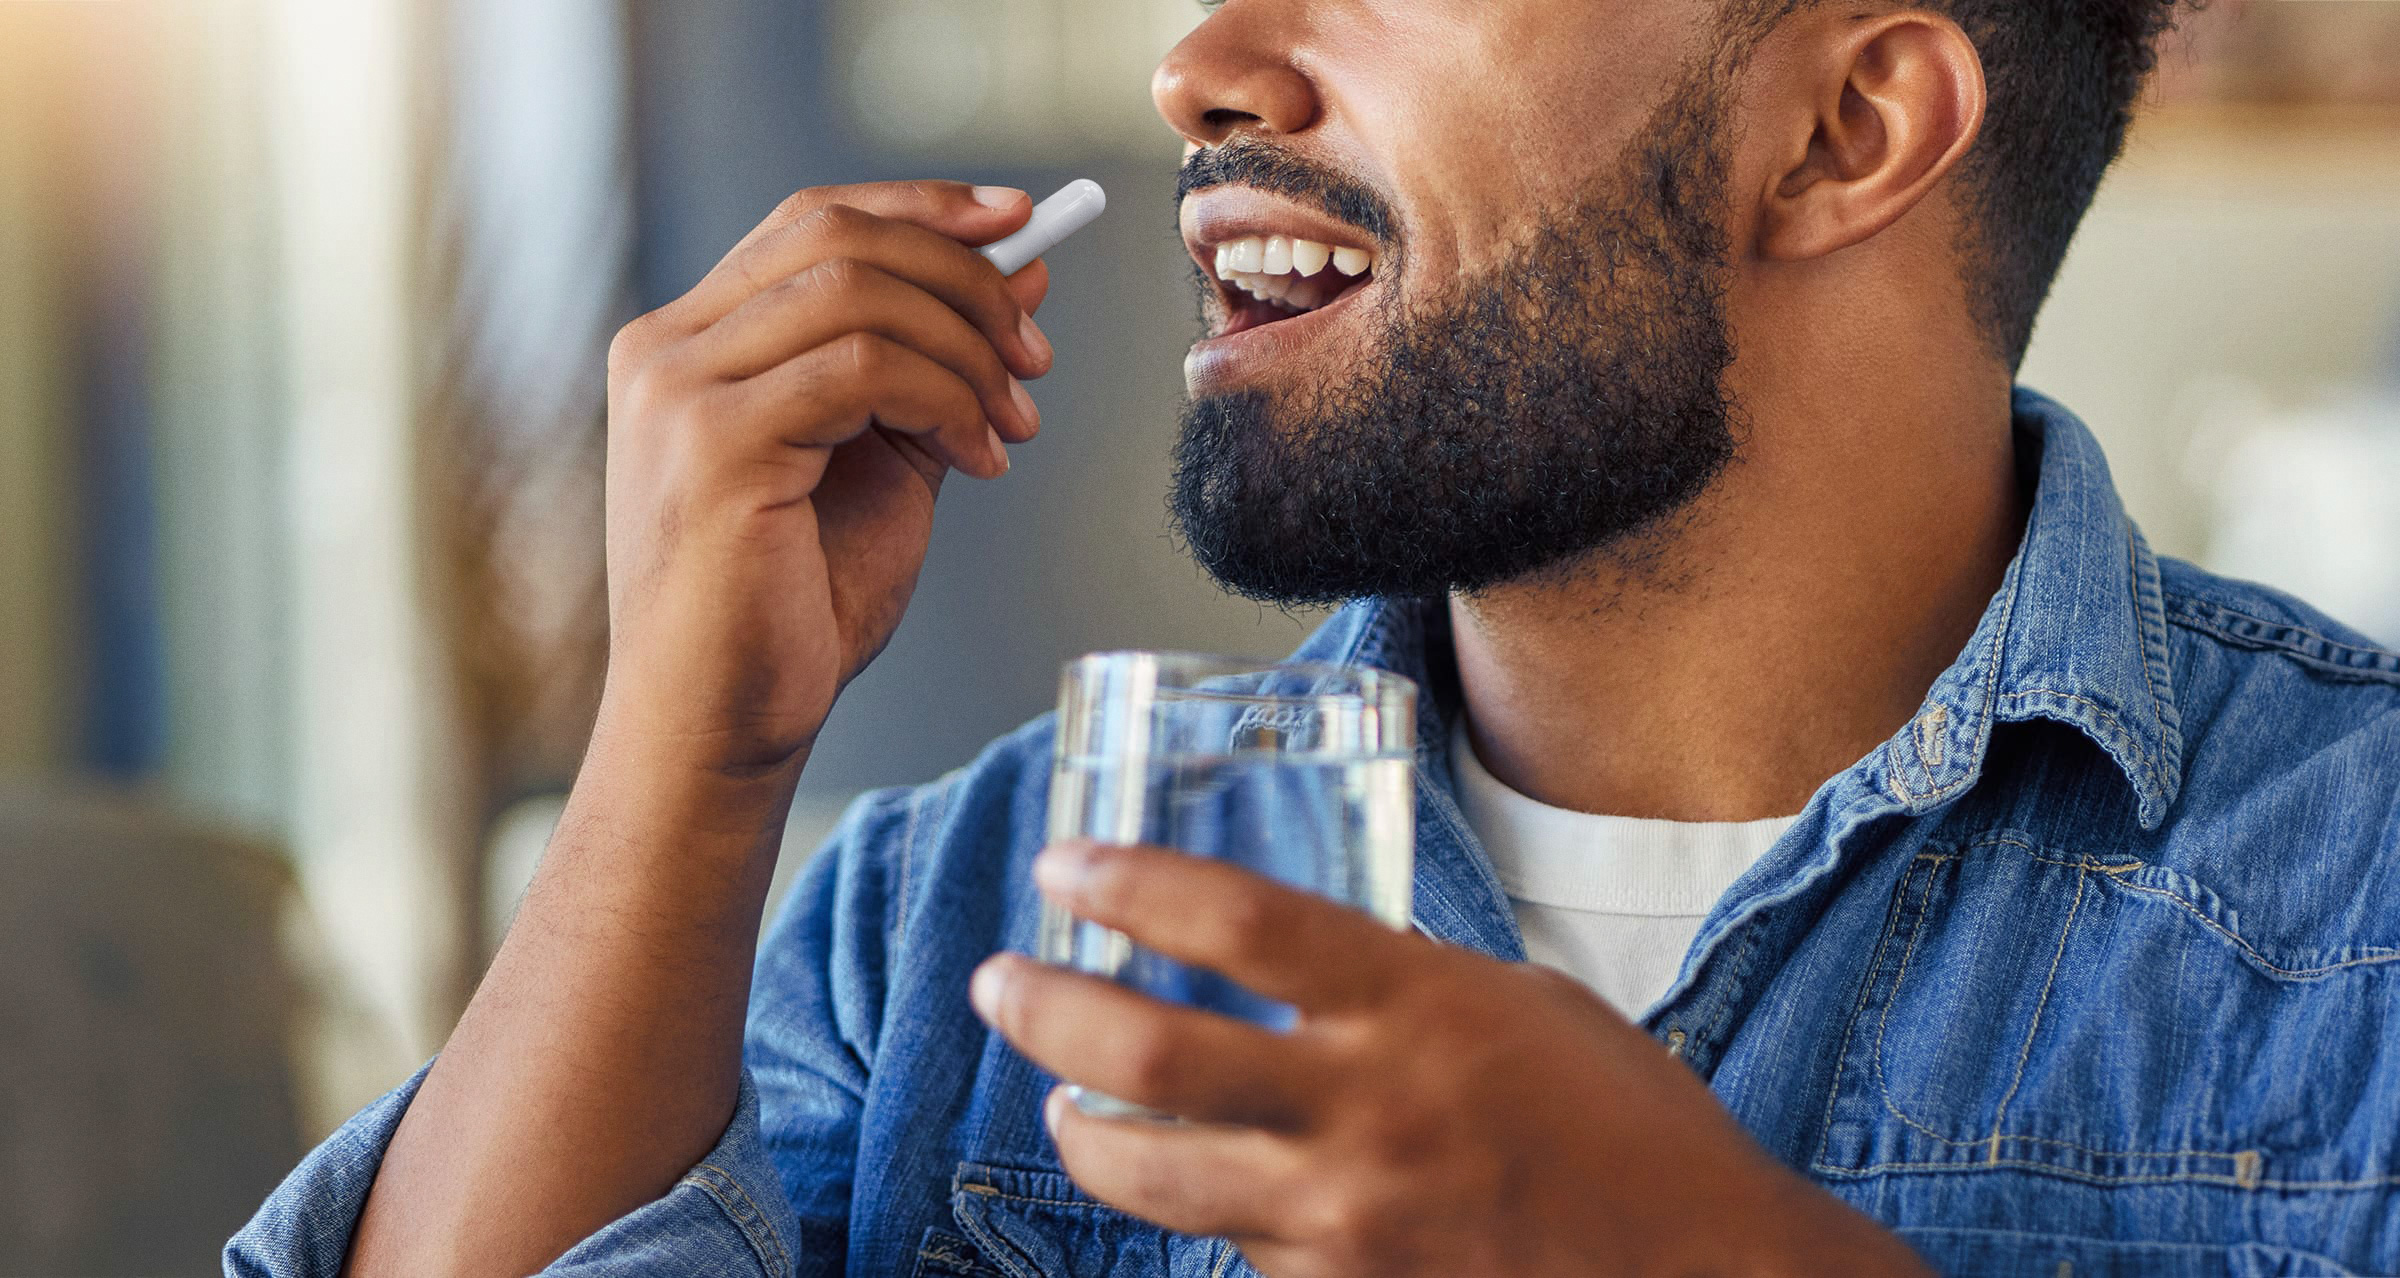 A man with a black beard in a denim shirt taking a white pill while holding a glass of clear liuid.